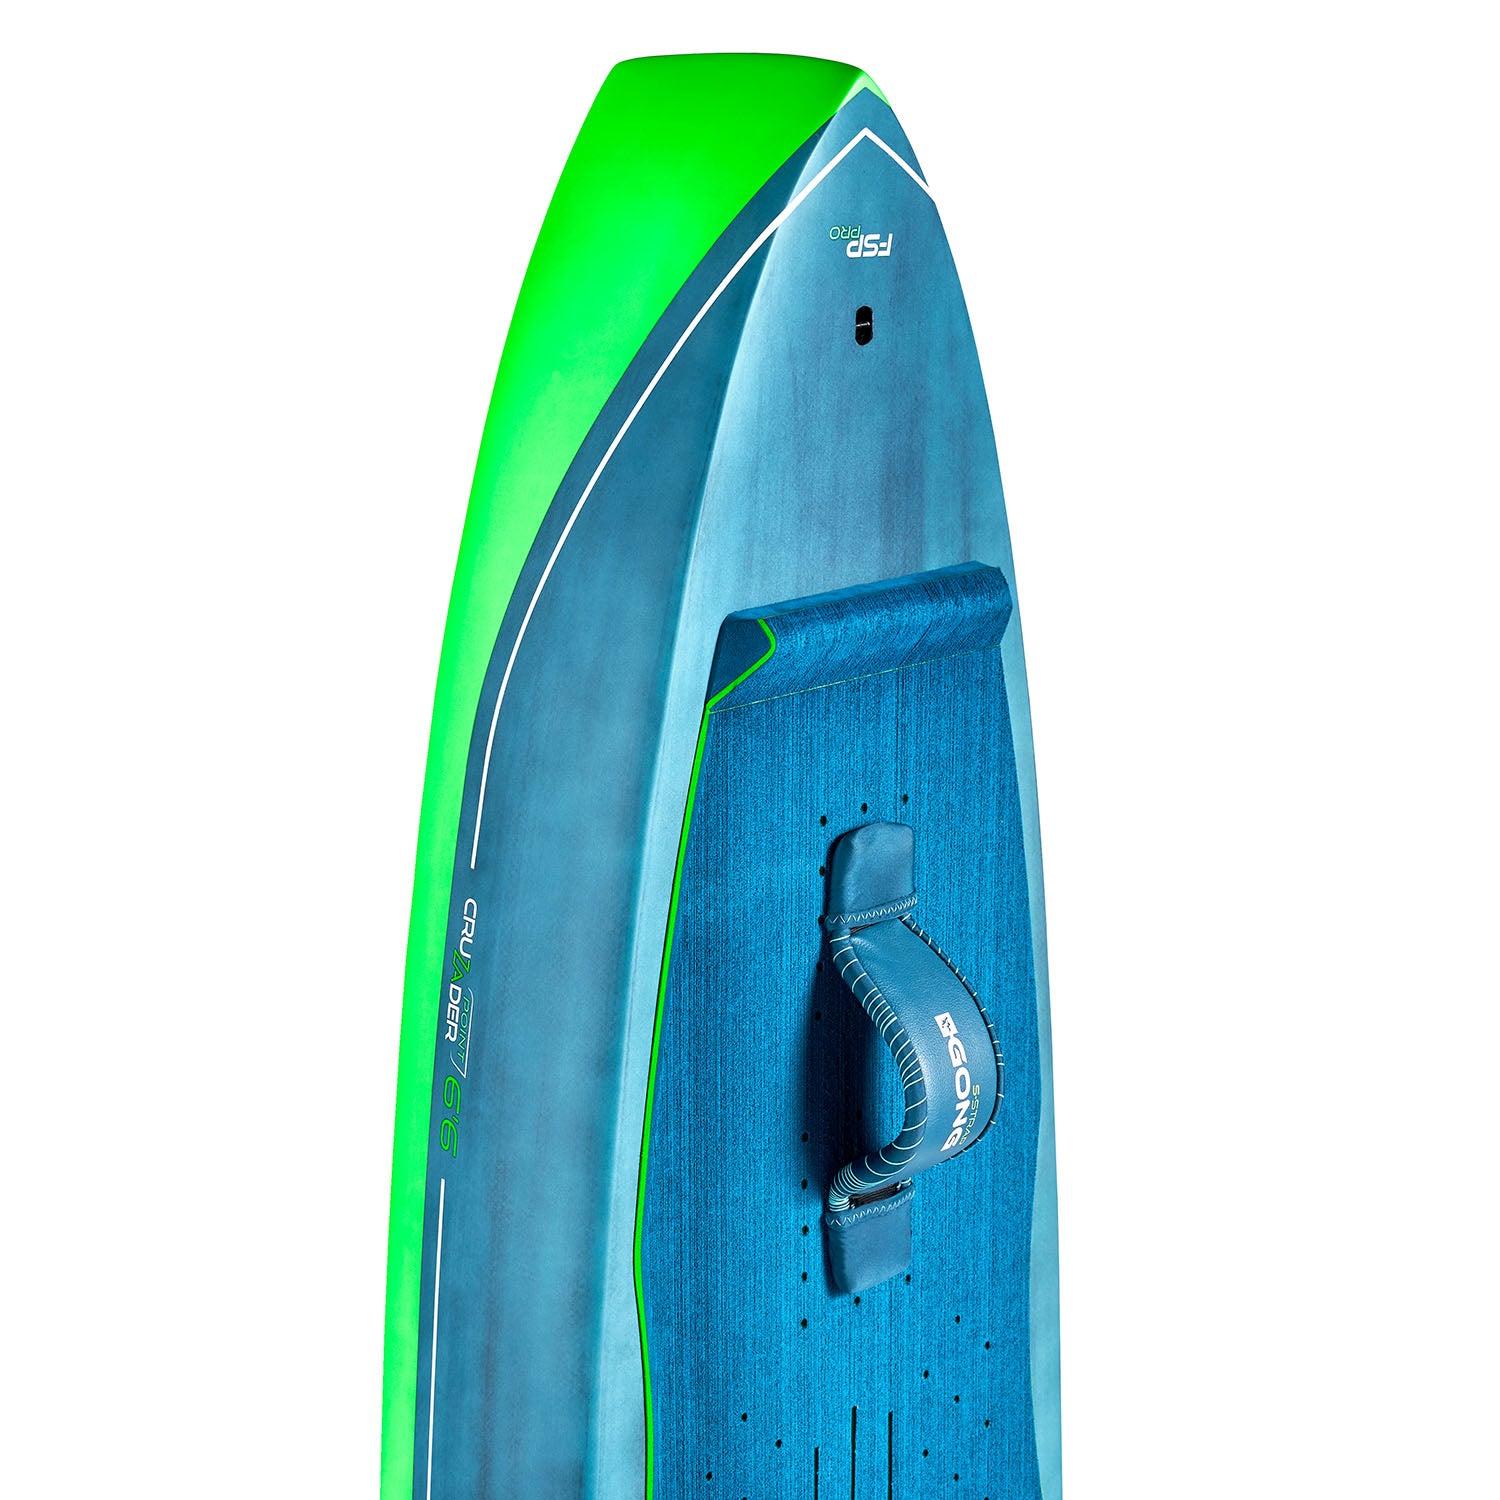 GONG | Wing Foil Board Cruzader Point FSP Pro